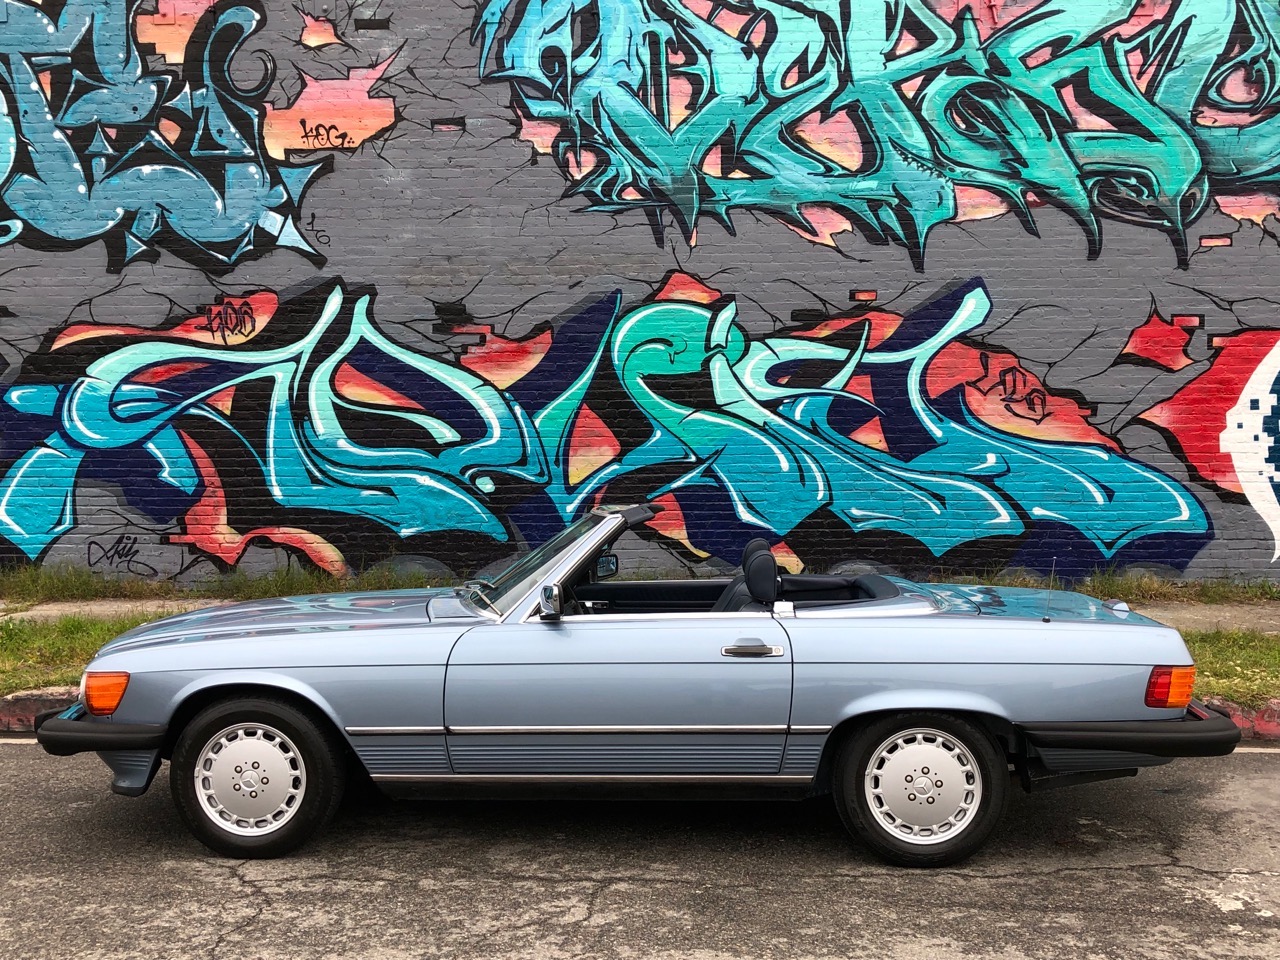 Used 1989 Mercedes Benz 560 Class 560 SL 2dr Convertible